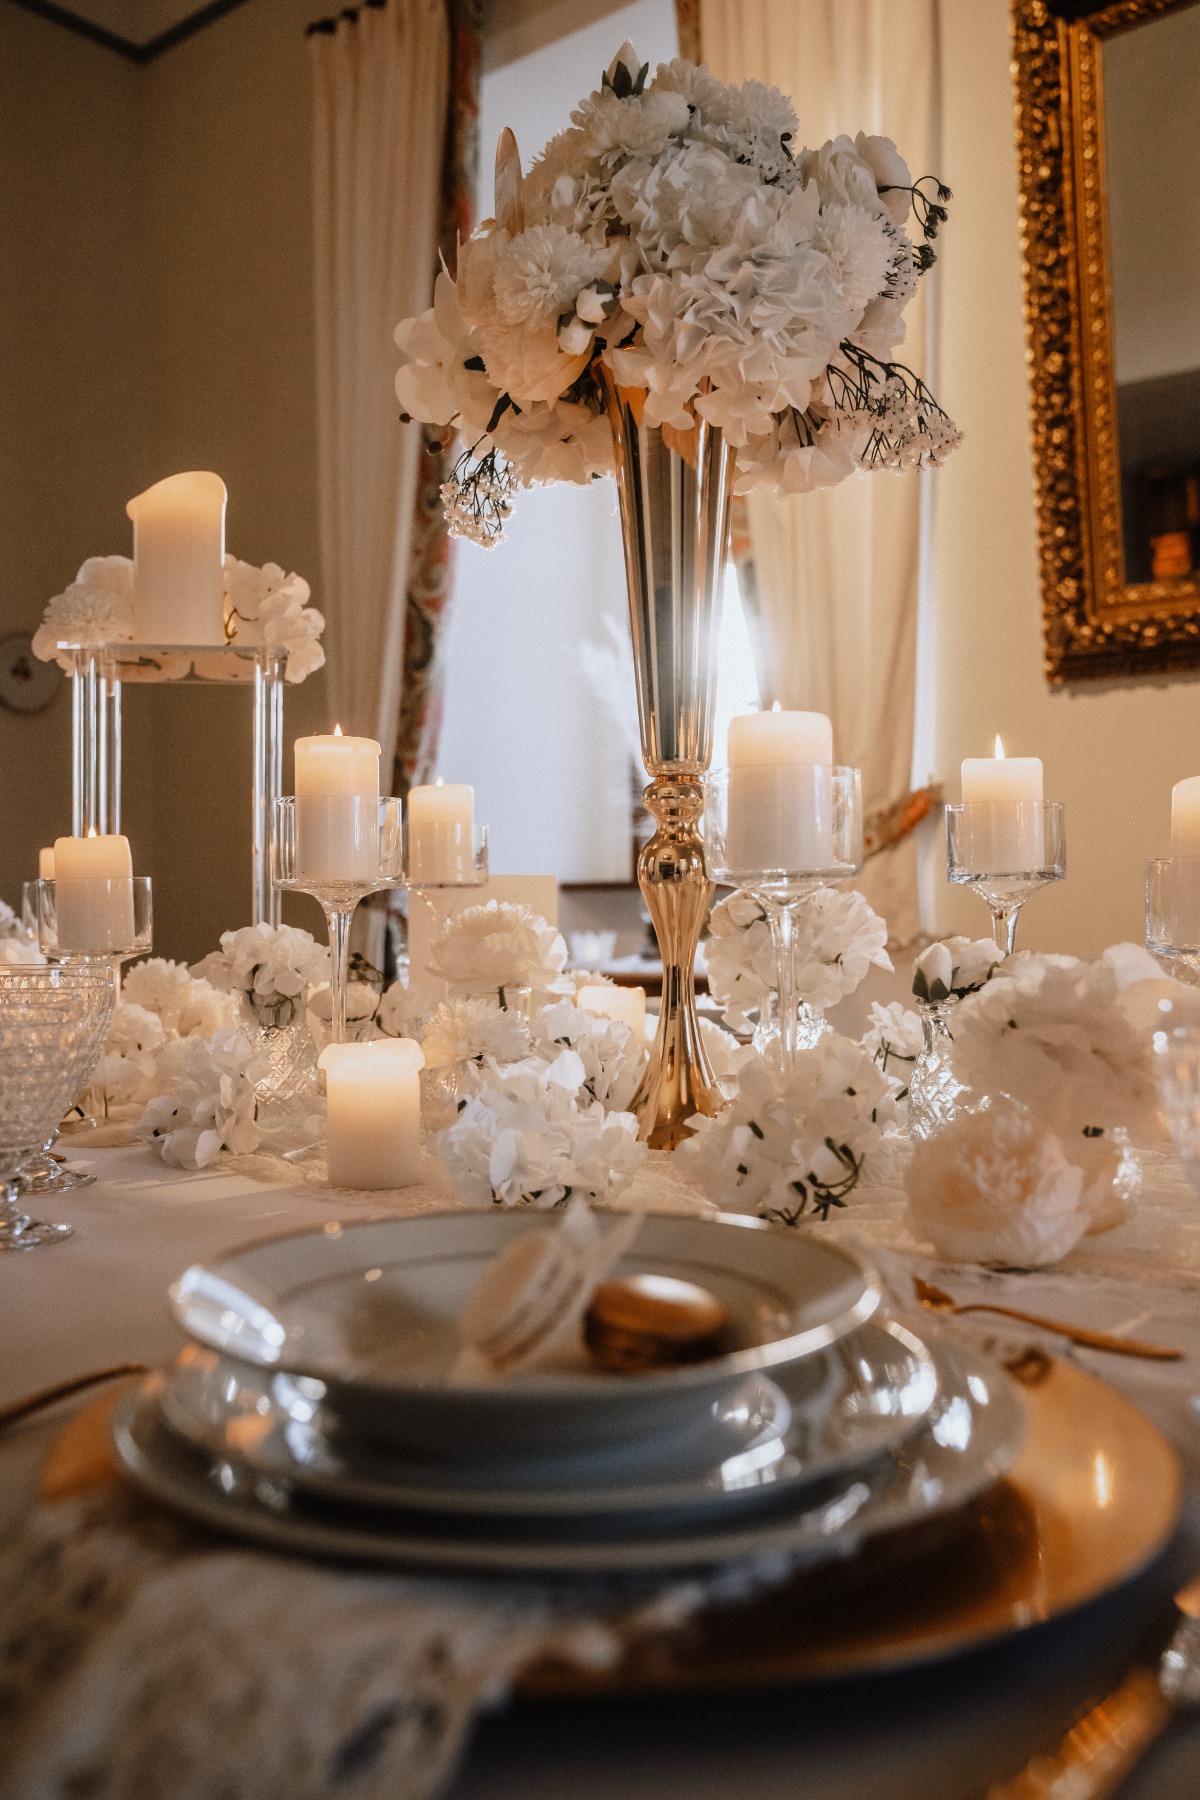 cloud-inspired centerpieces